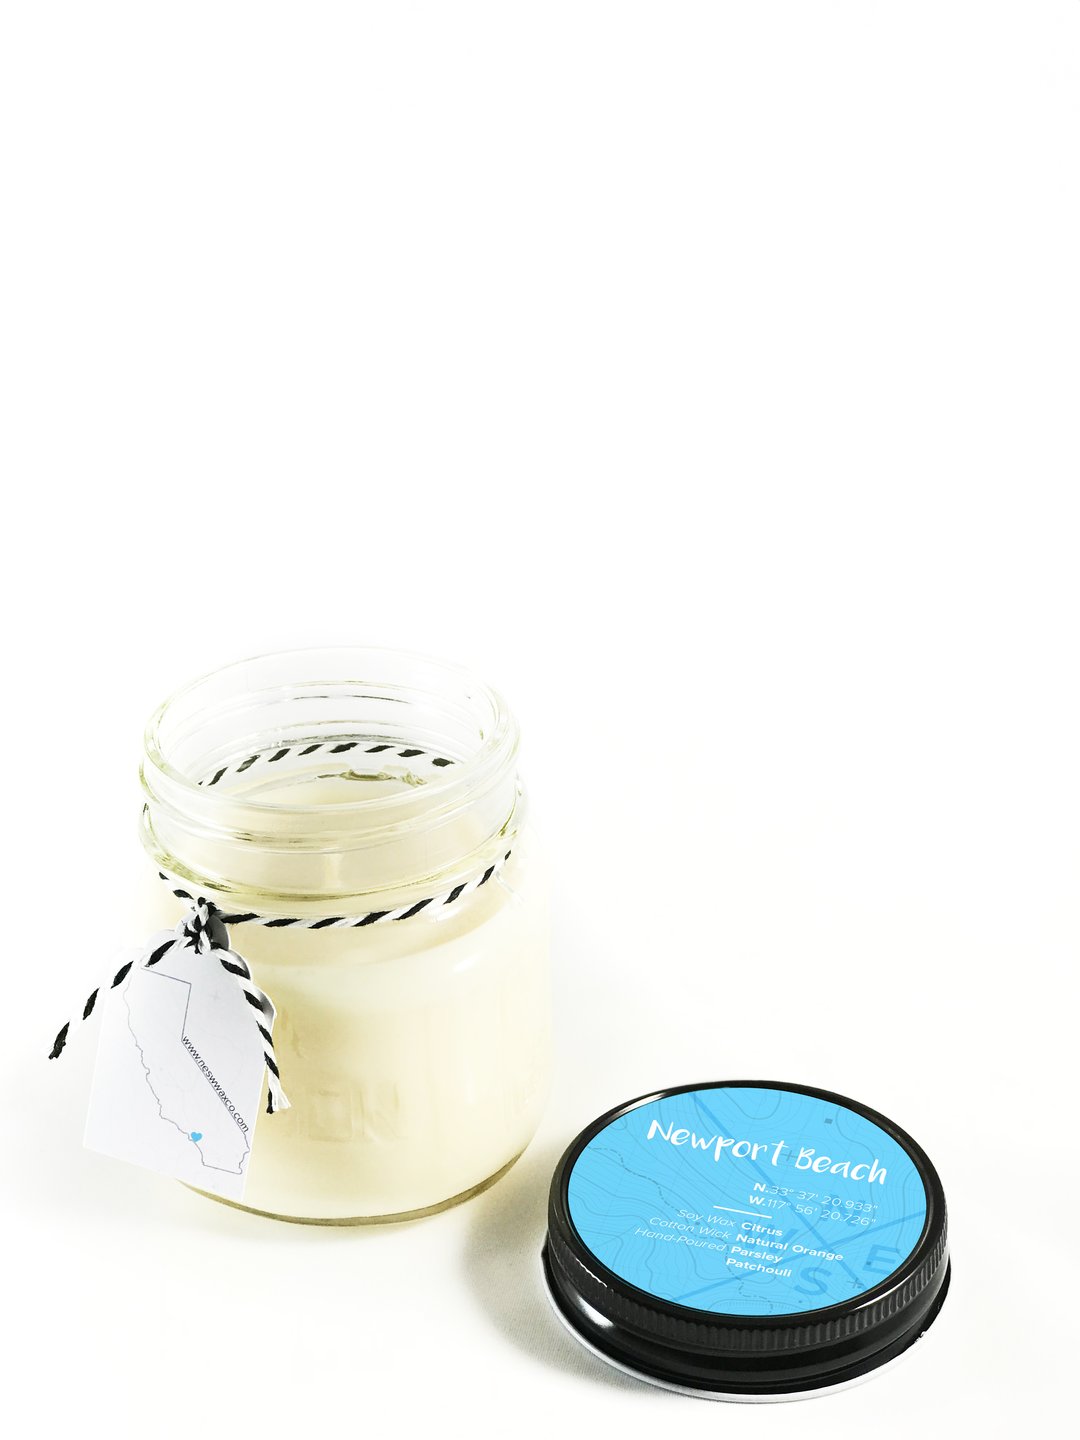 Newport Beach Soy Candle - Main Image Number 1 of 1